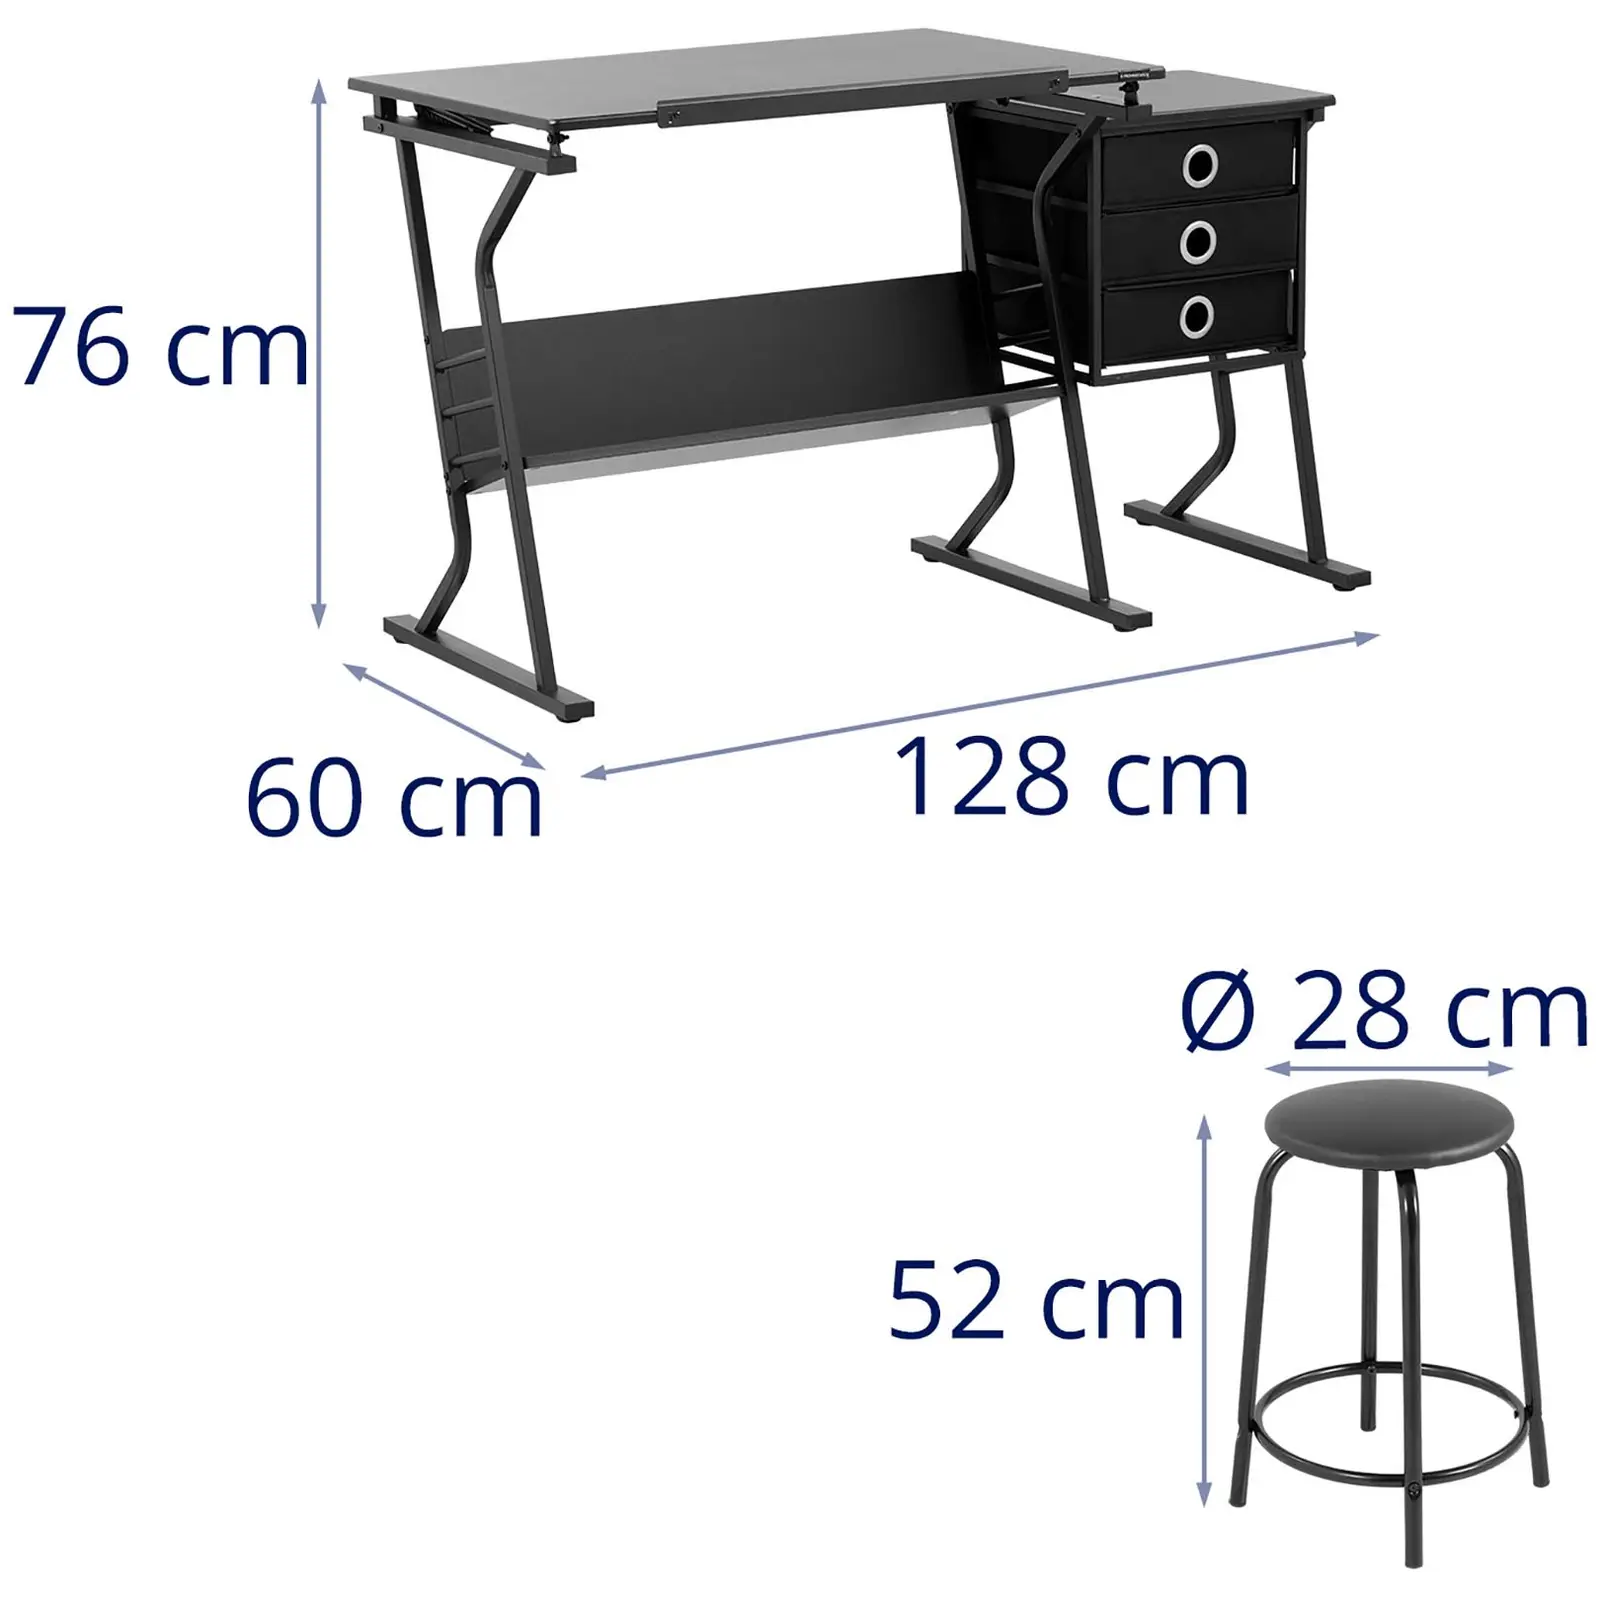 Drawing table - 90 x 60 cm - inclinable - stool and side table